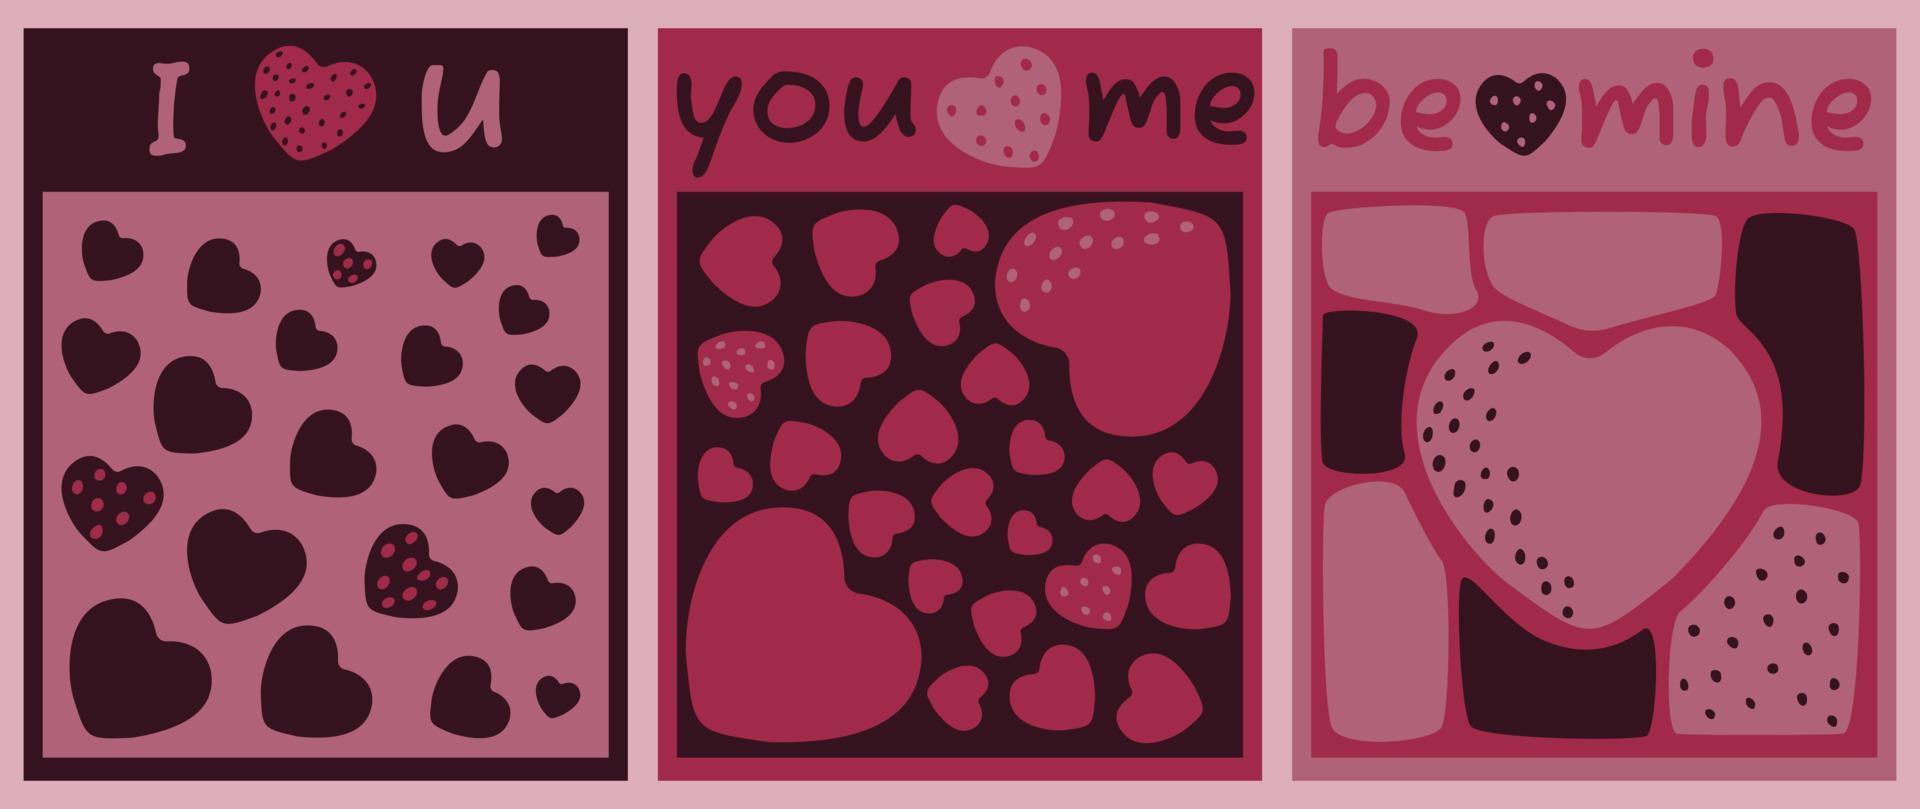 Vector illustration of love, hearts. Recognition cards - I love you, you and me, be mine. Postcards, greetings, posters in the style of minimalism.